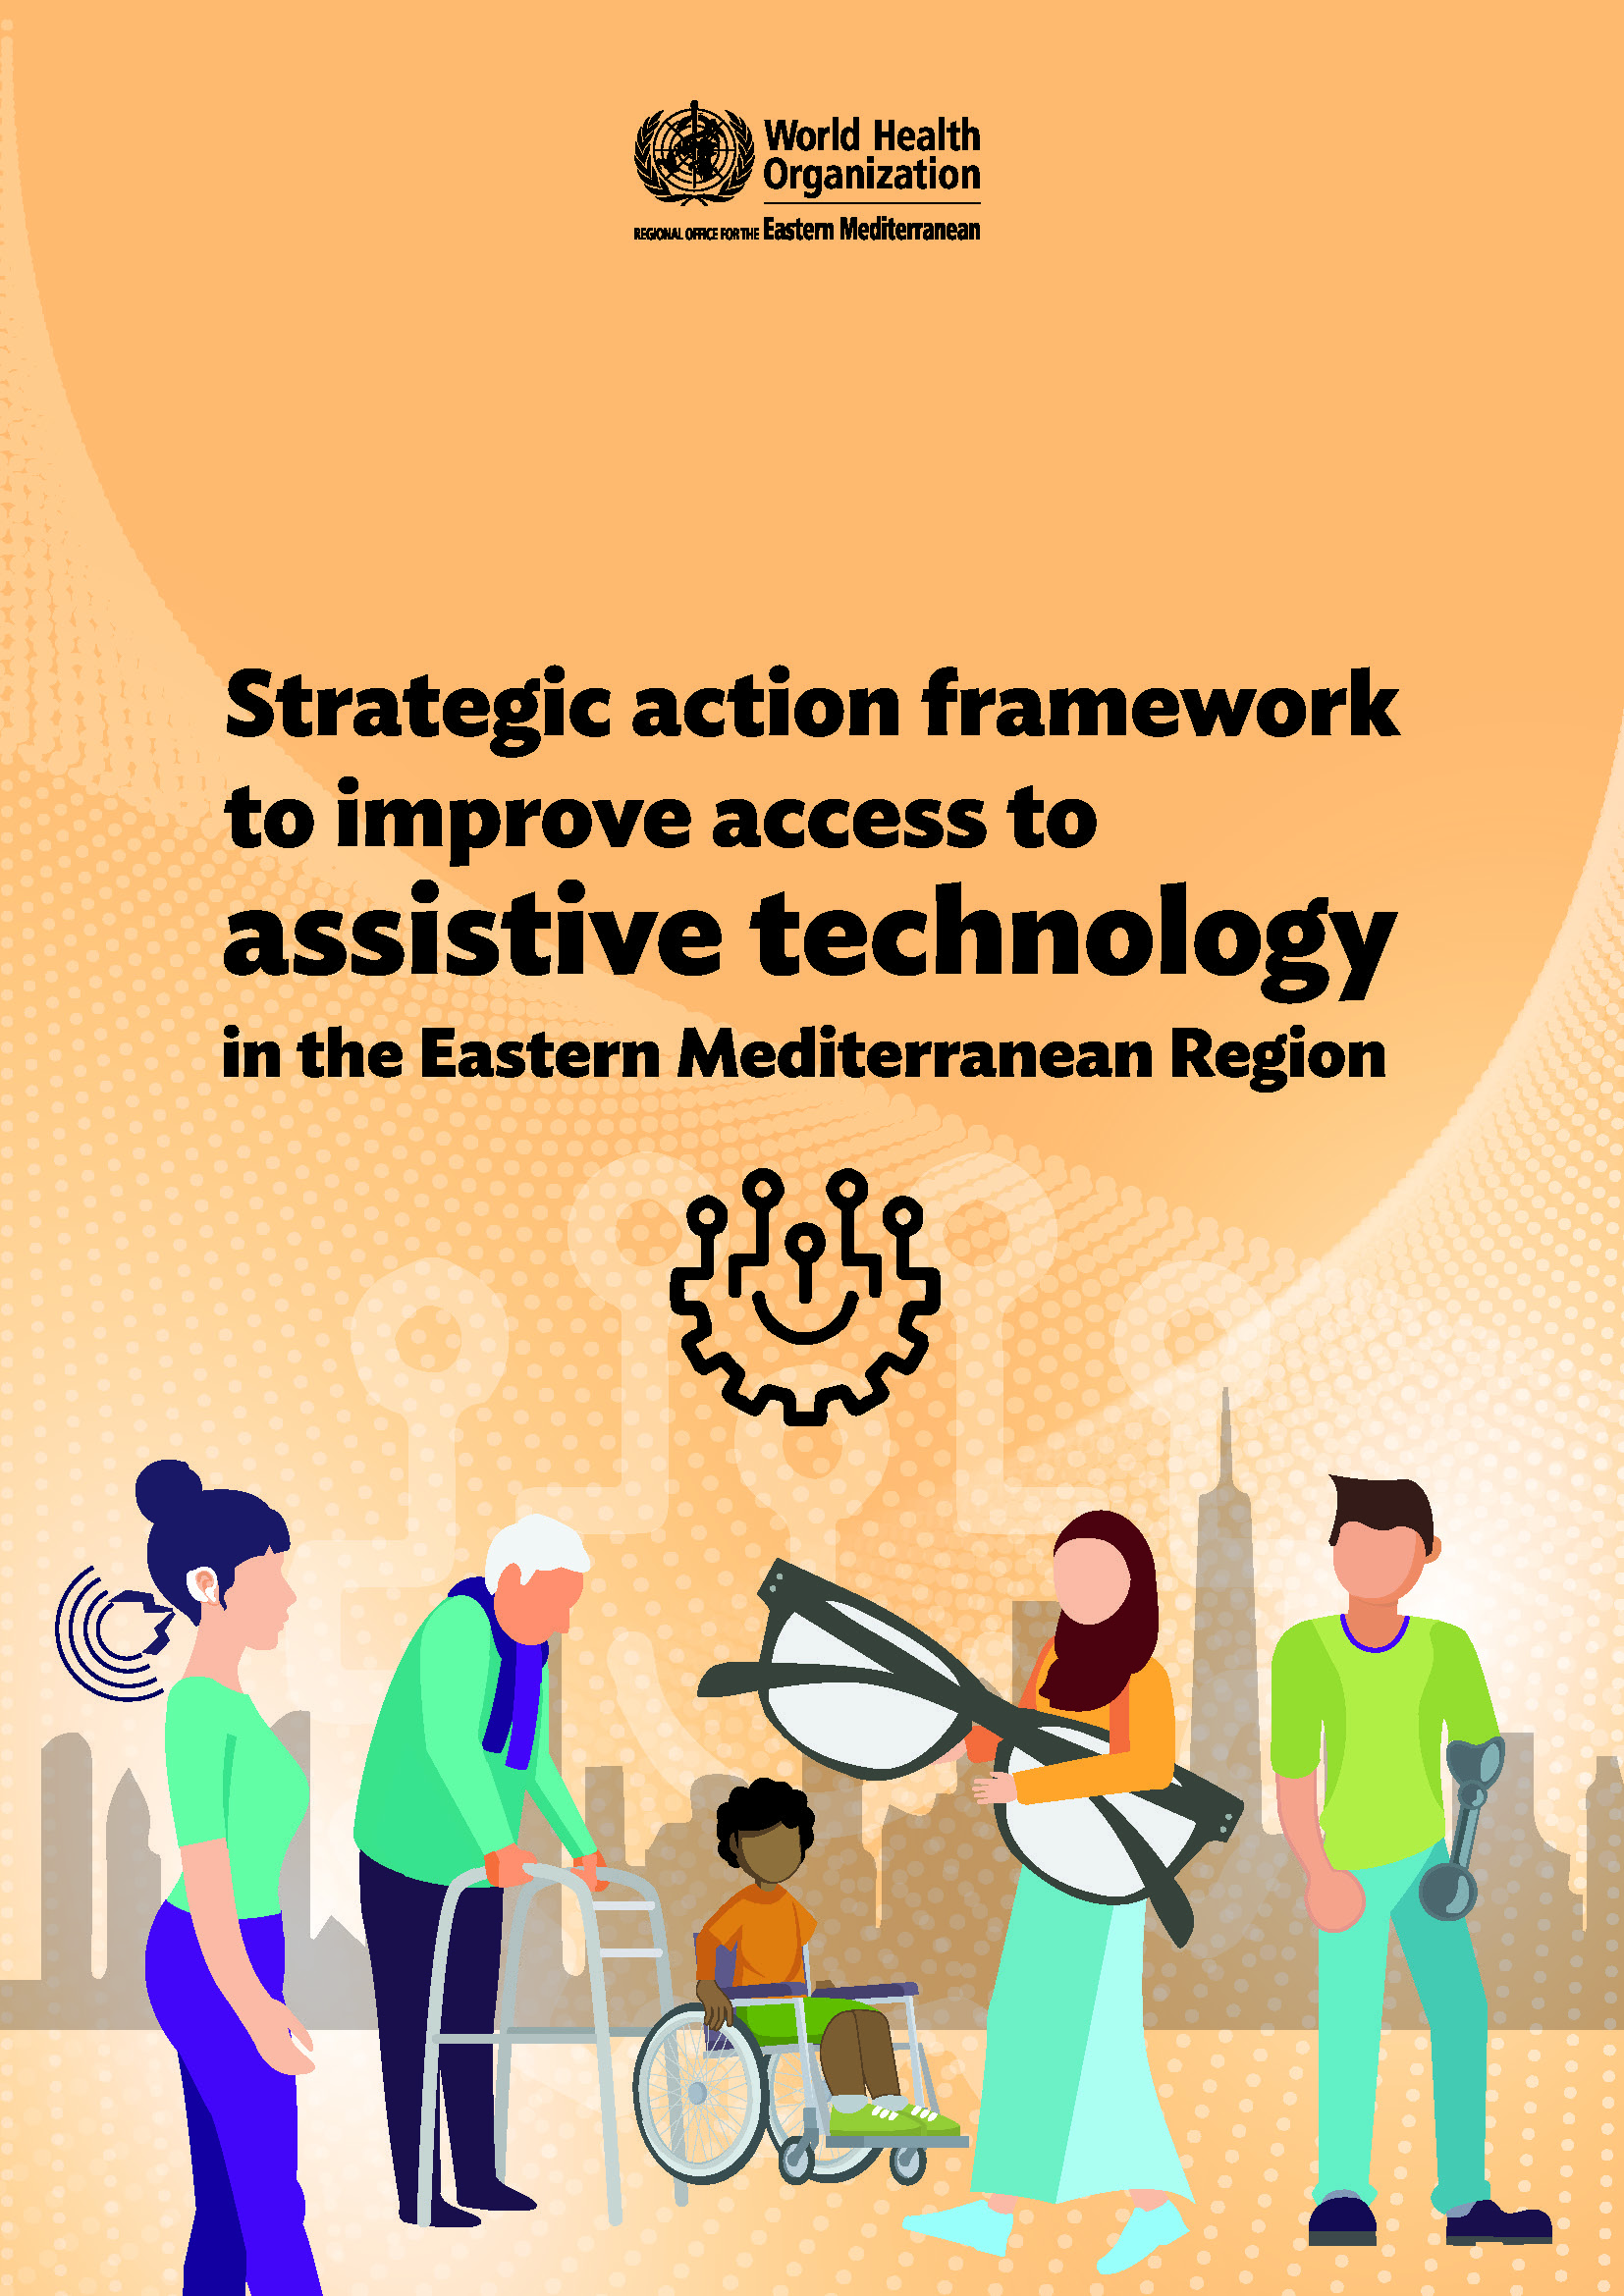 Strategic action framework to improve access to assistive technology in the Eastern Mediterranean Region